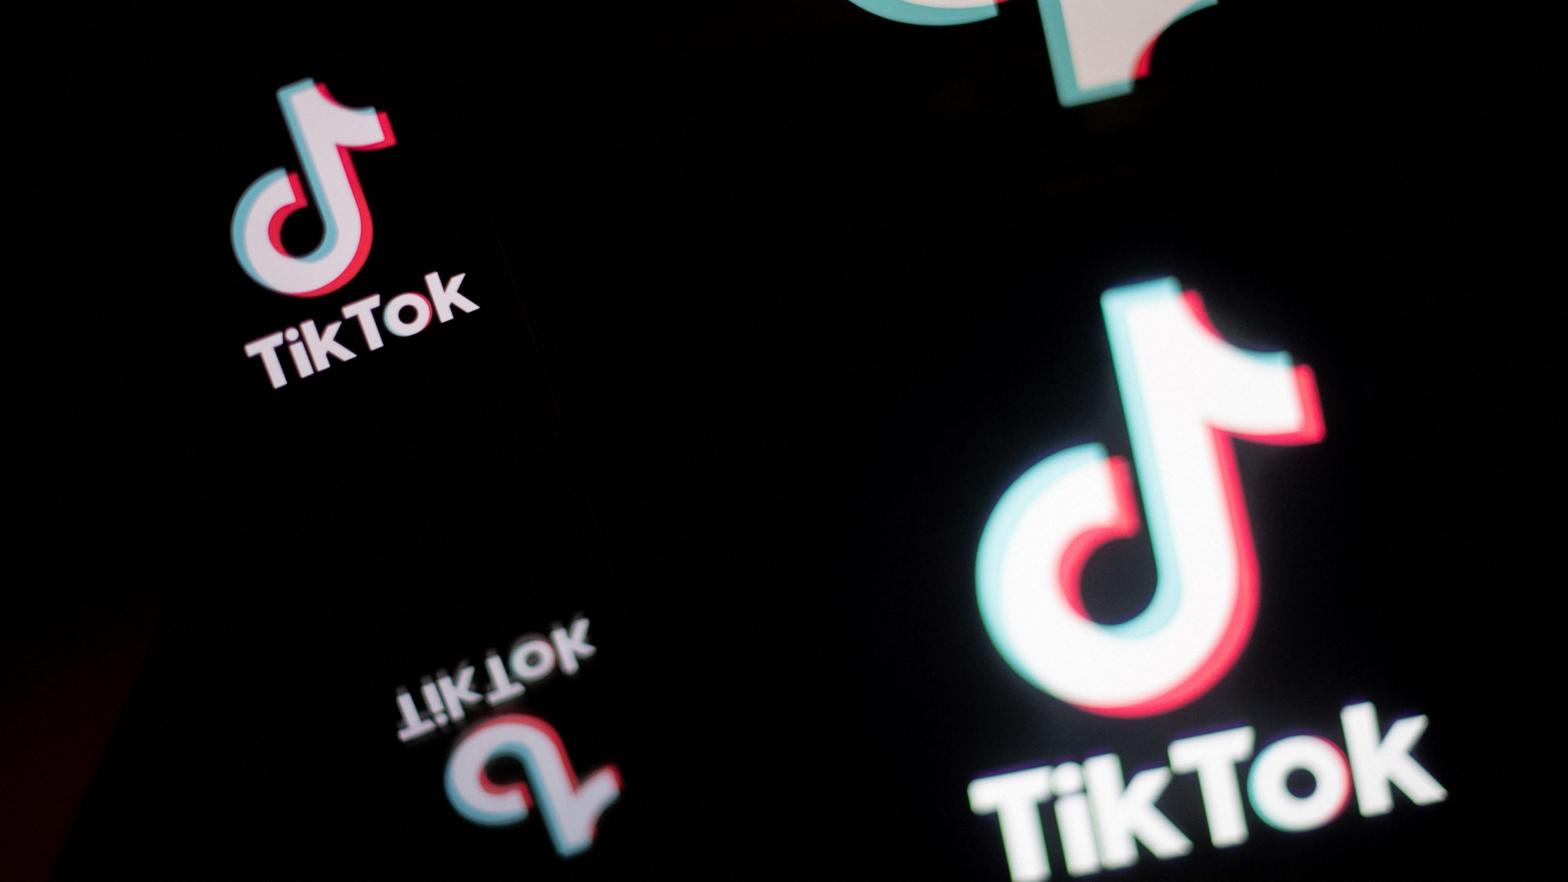 Researchers of a new TikTok study argue that using real-time social media data could potentially allow them to pre-bunk and debunk misinformation faster. (Image: Loic Venance, Getty Images)